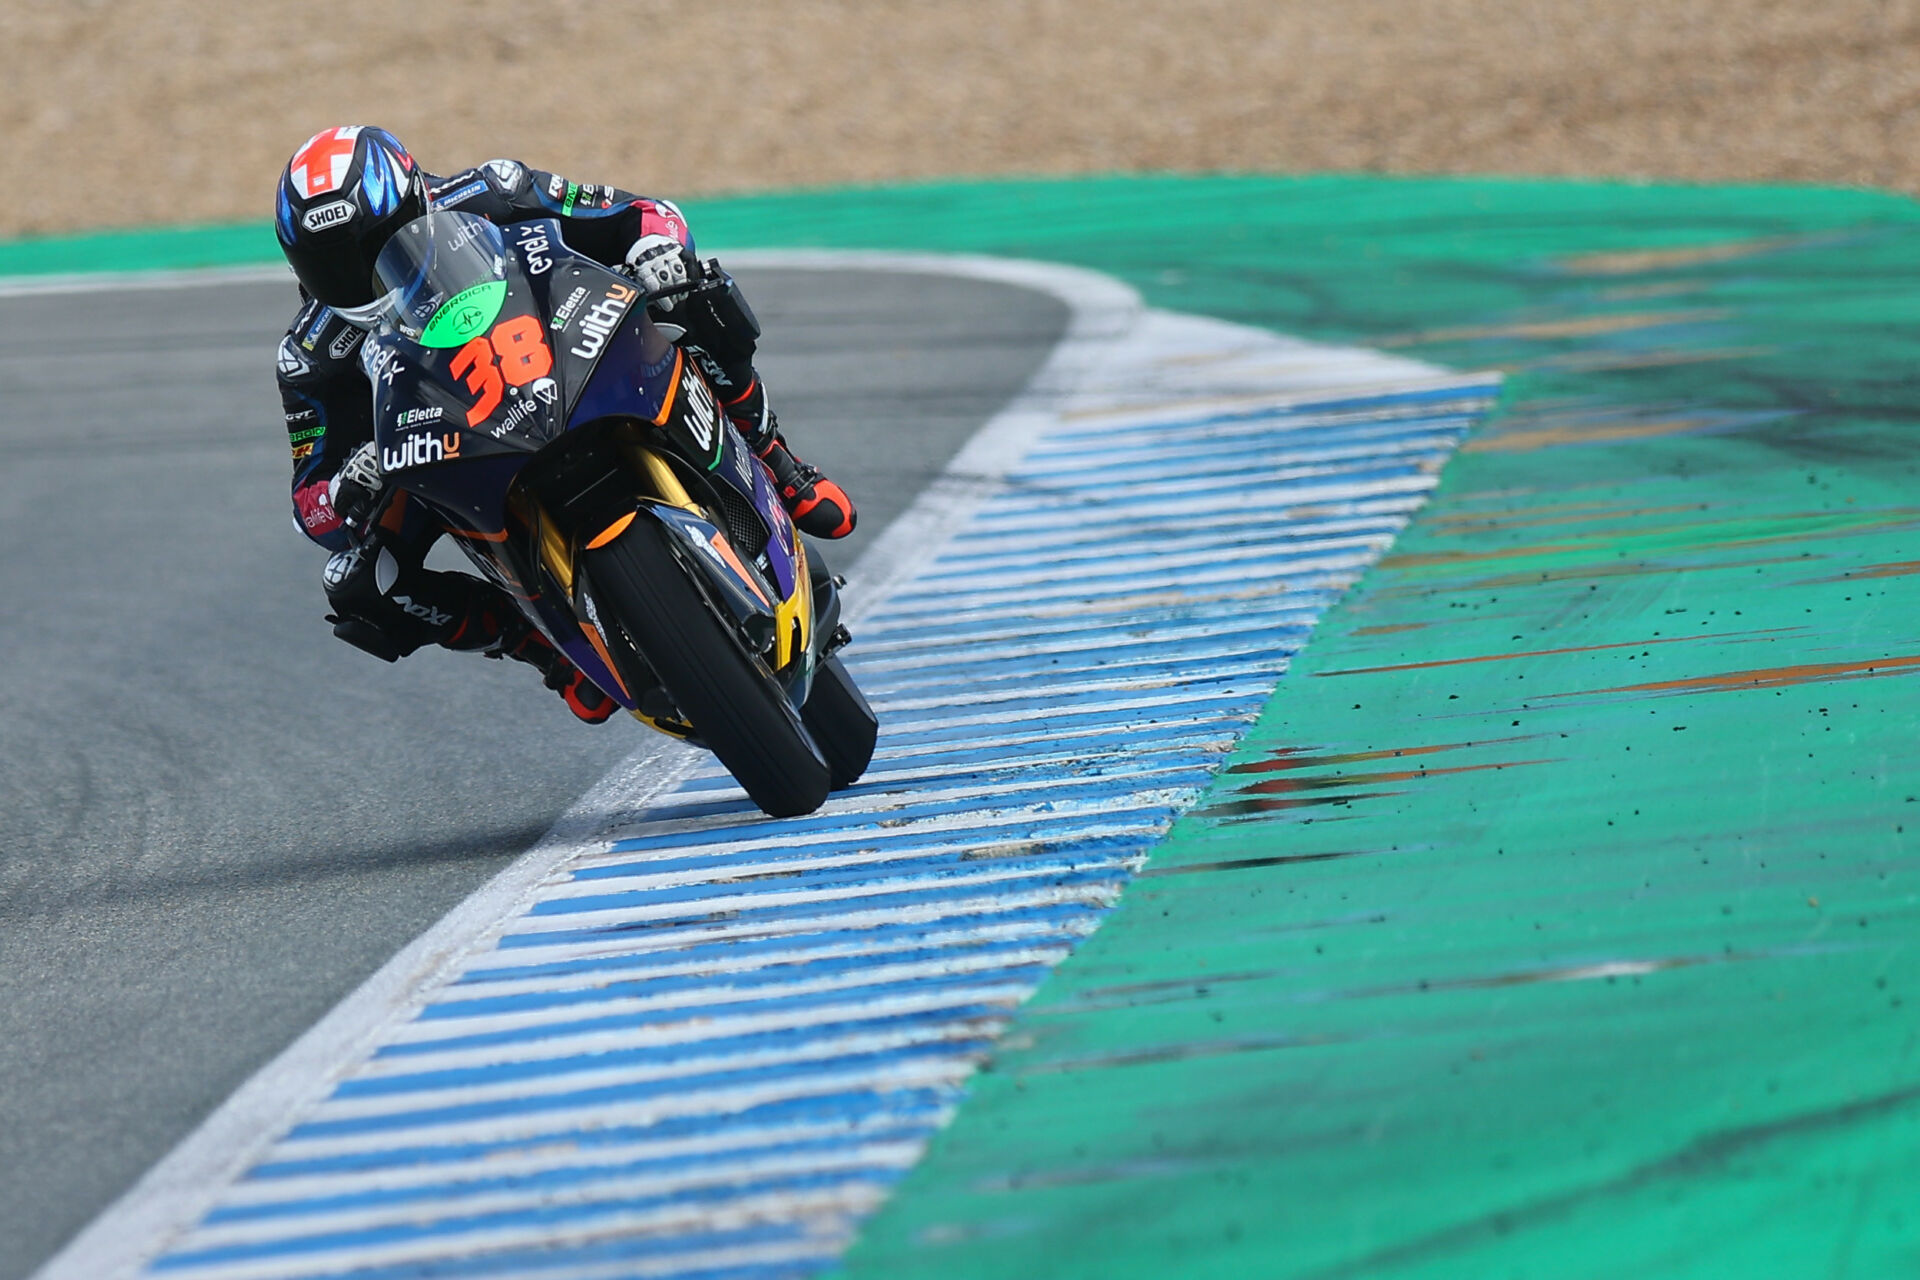 Bradley Smith (38) riding in mixed conditions during Day Two of MotoE testing at Jerez. Photo courtesy Dorna.